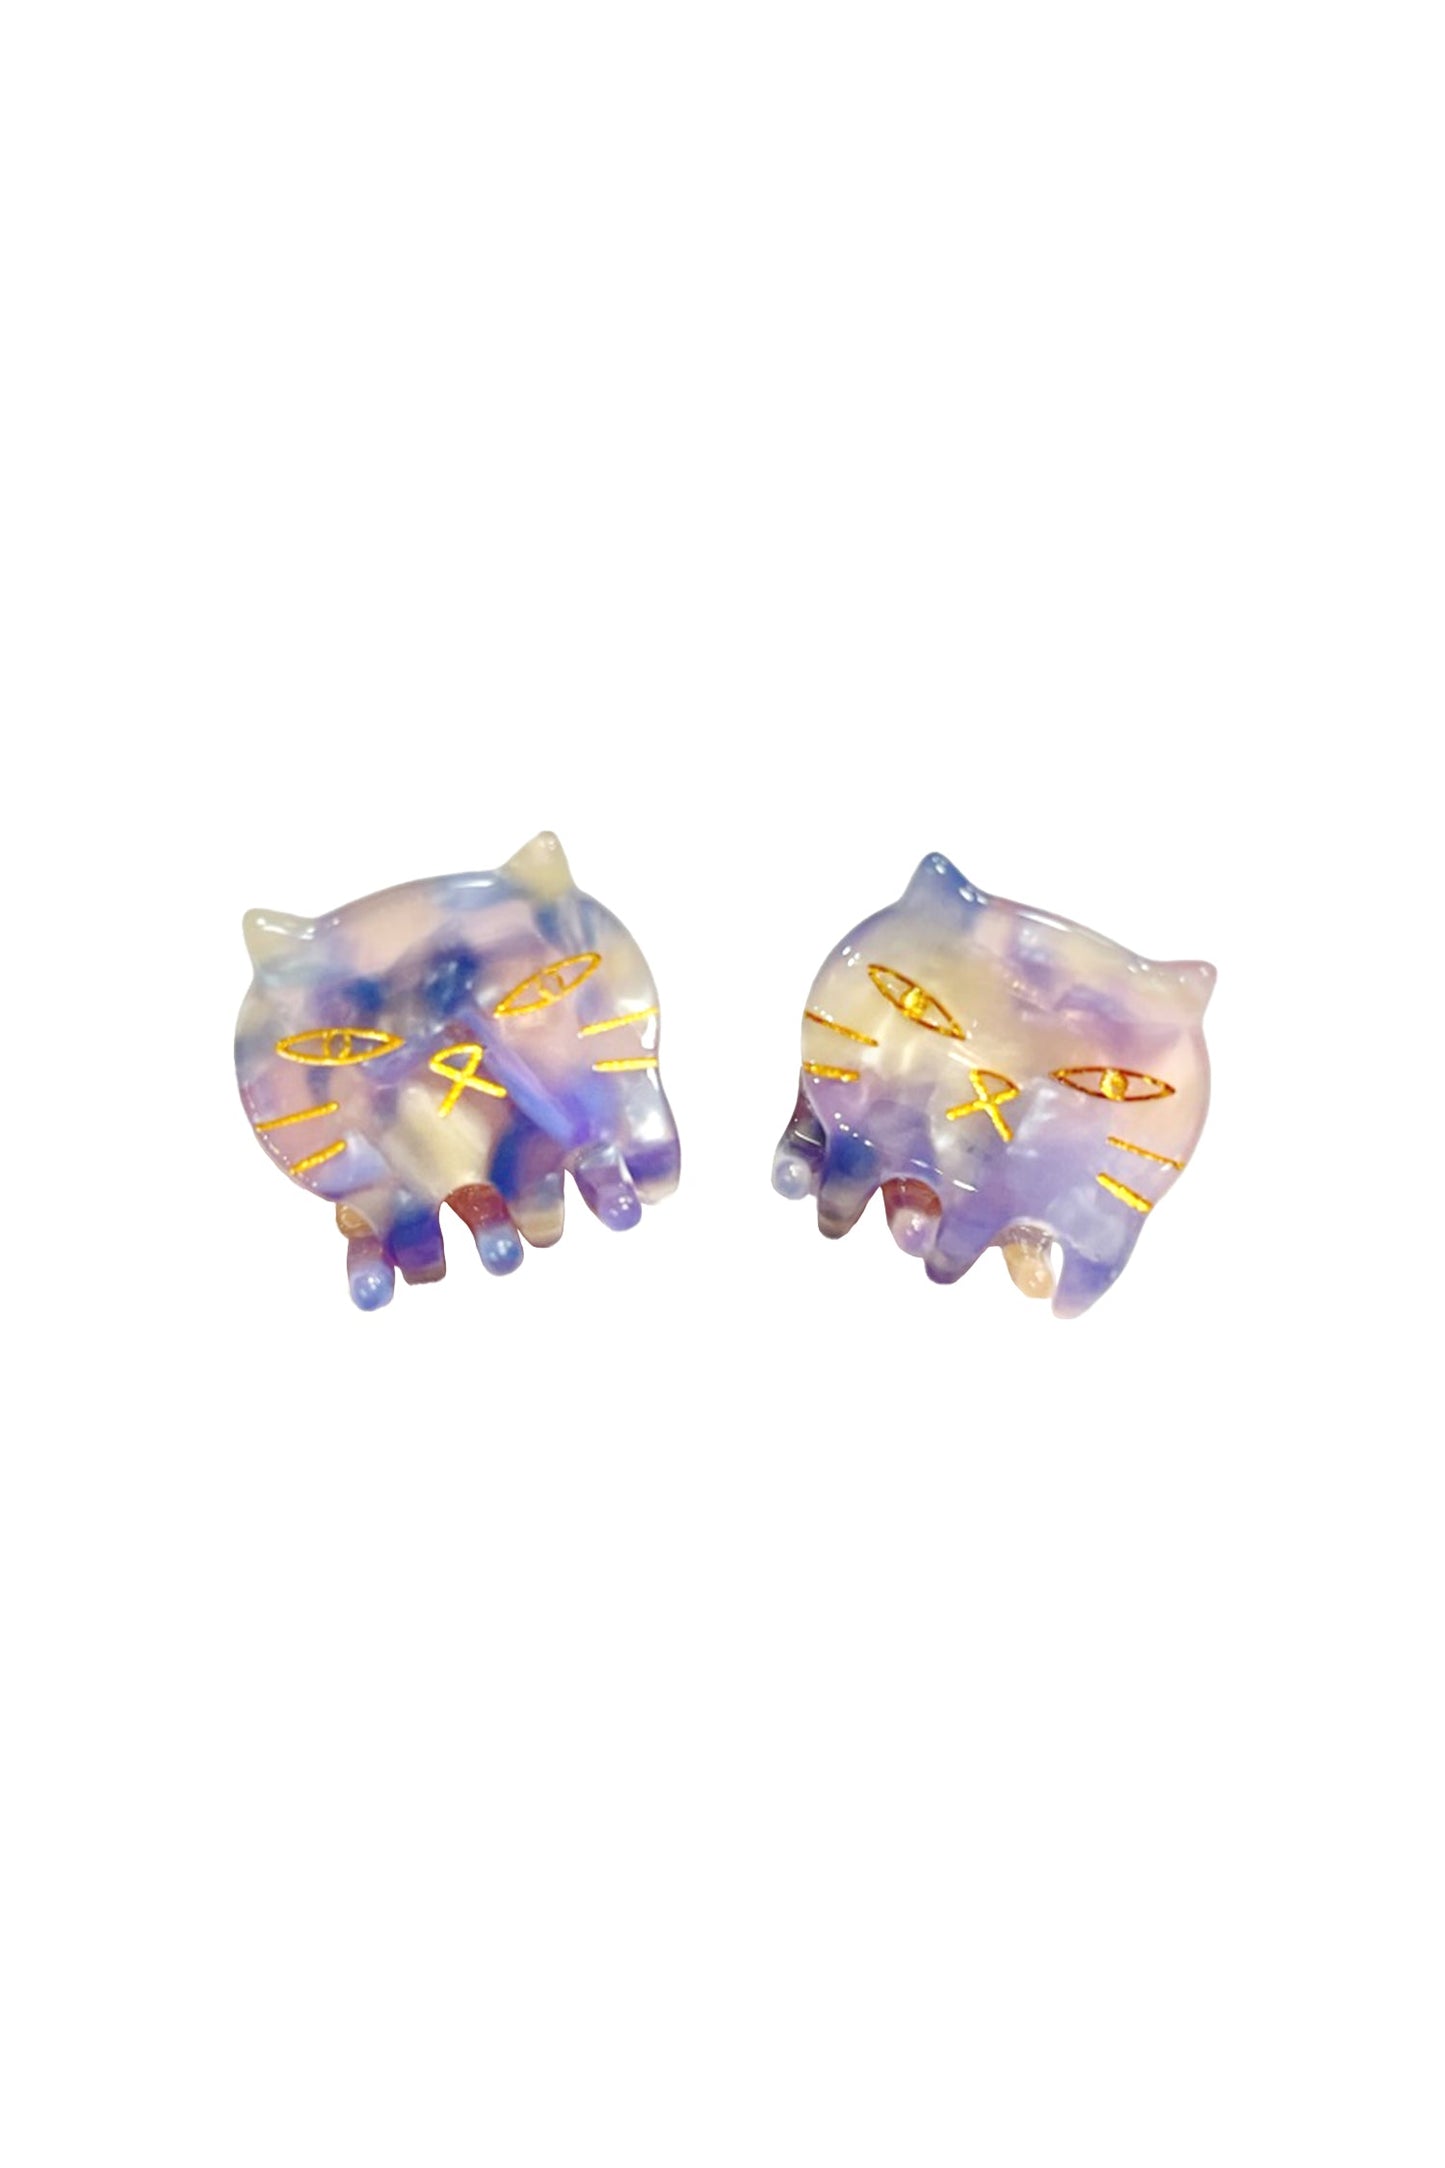 The Cat's Meow Jaw Clip Pair, lavender cat head on a golden jaw clip to add some fun to your hairstyle